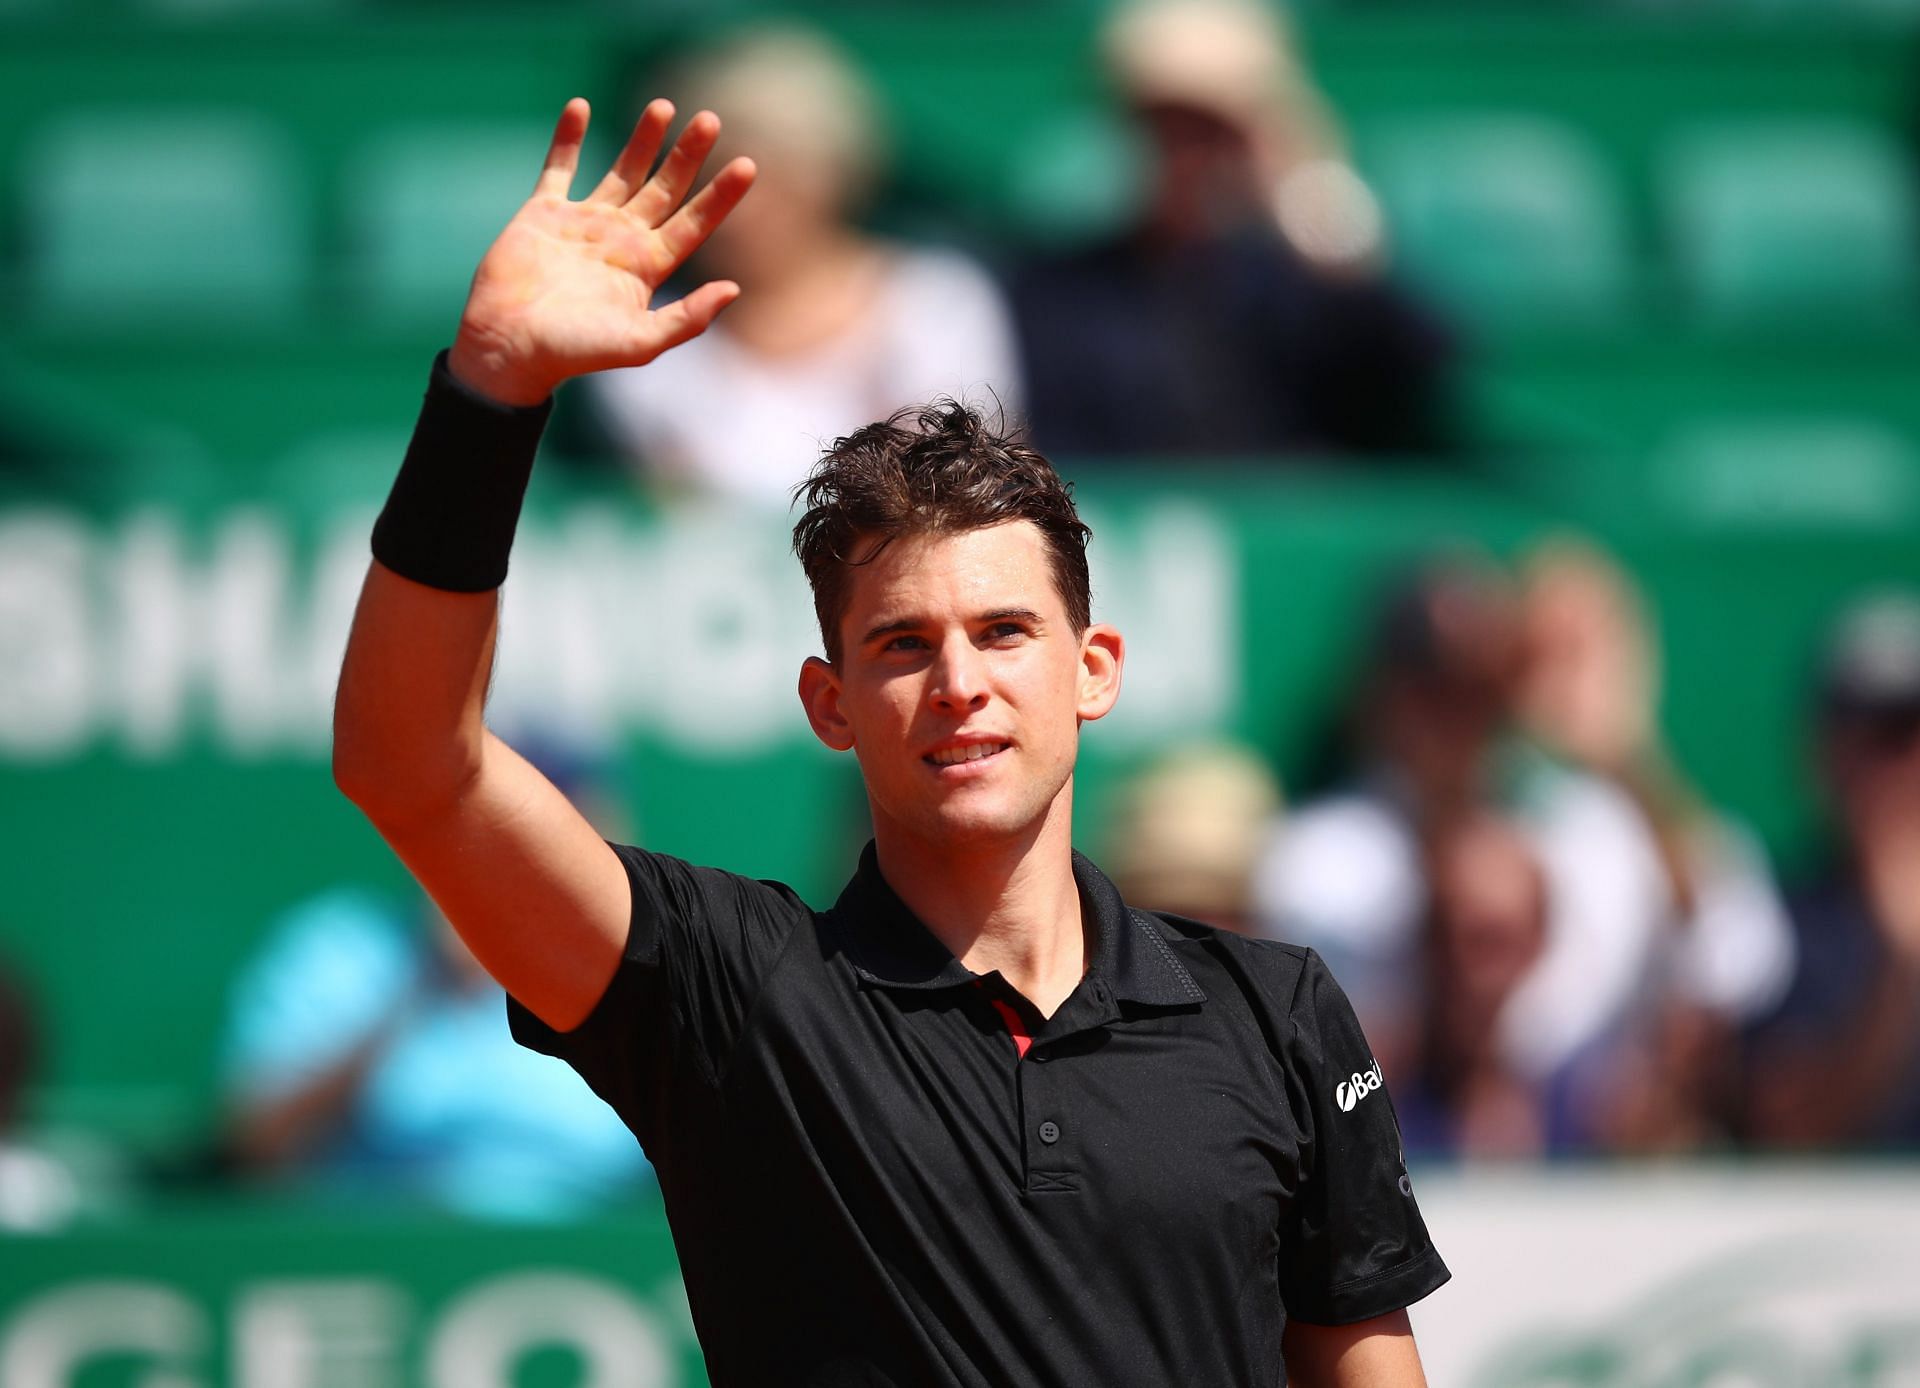 Dominic Thiem will make his ATP return at the Monte-Carlo Masters